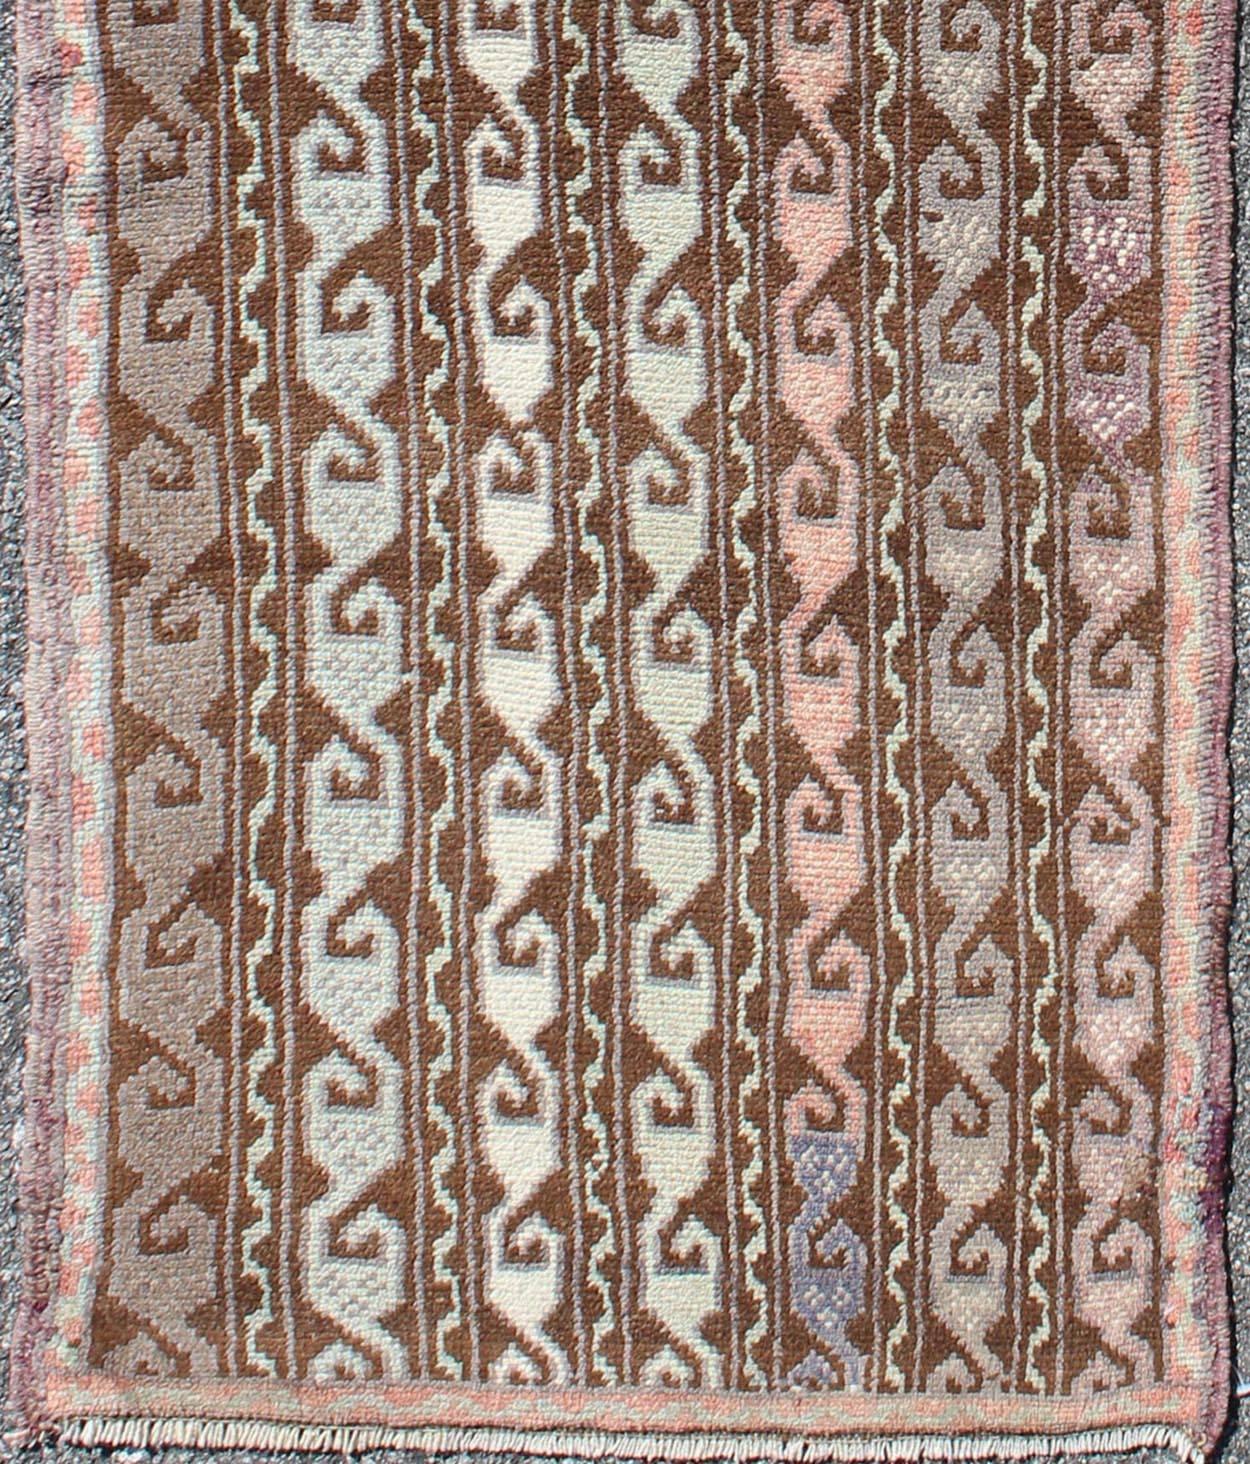 Brown and pastel-colored vintage Turkish Oushak runner with vining geometrics, rug en-957, country of origin / type: Turkey / Oushak, circa 1930

This vintage Turkish gallery runner (circa 1930) features a unique blend of colors and an intricately